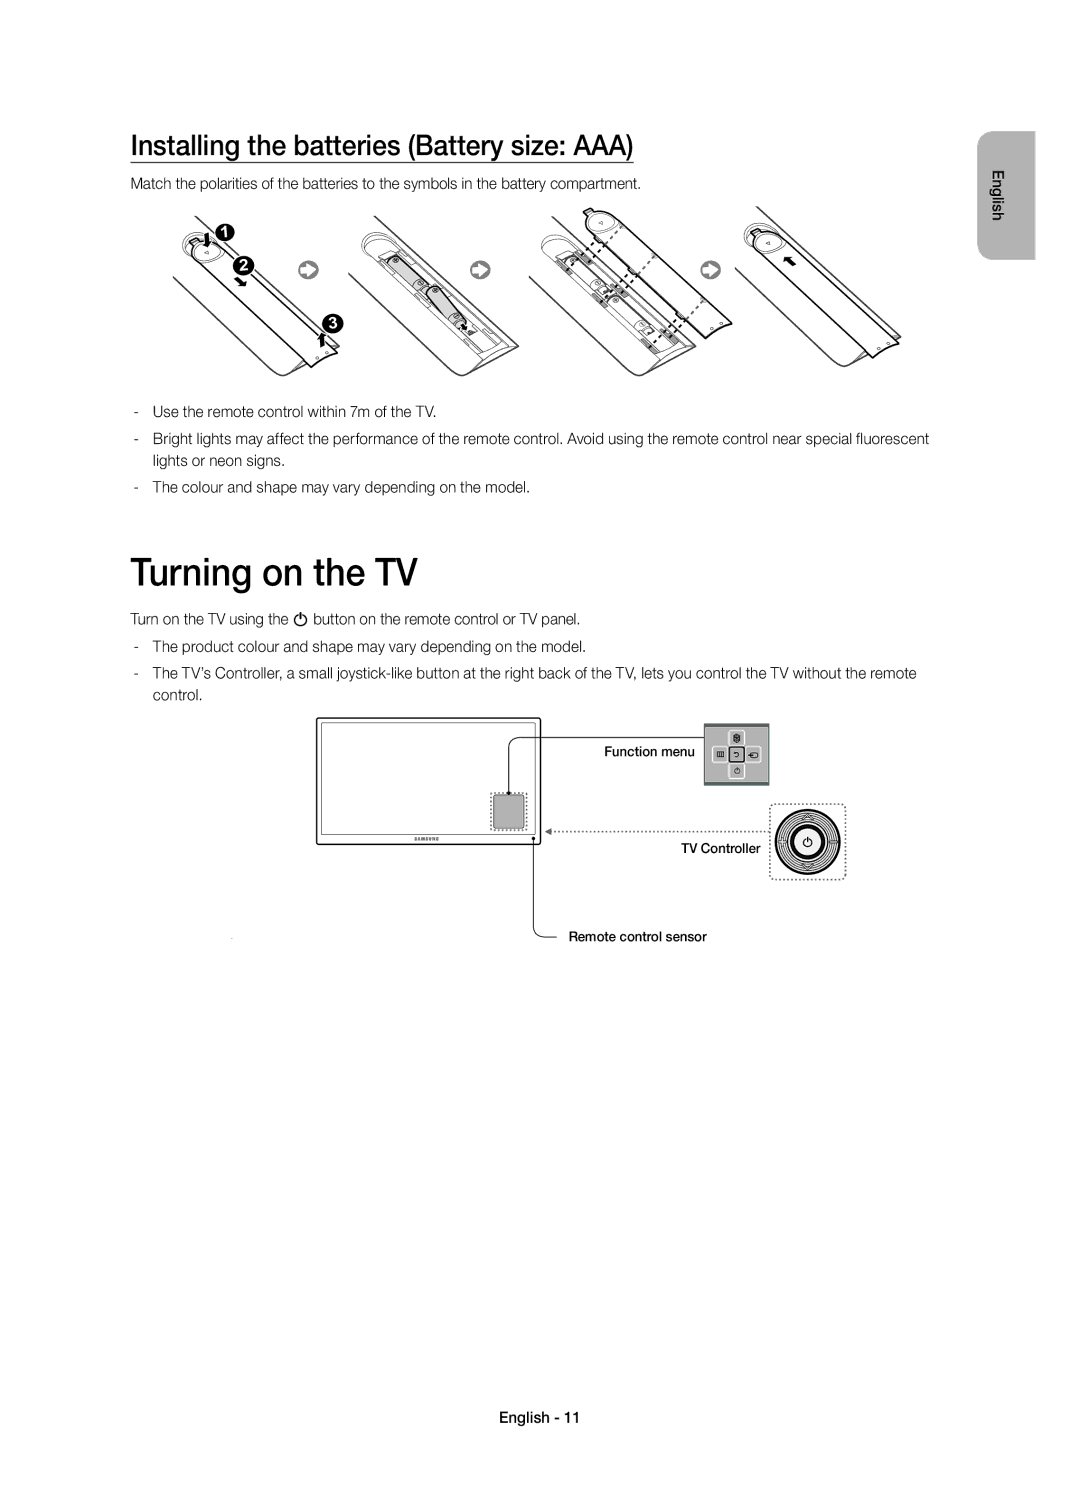 Samsung UE48H5515AKXXE, UE40H5505AKXXE, UE48H5505AKXXE manual Turning on the TV, Installing the batteries Battery size AAA 